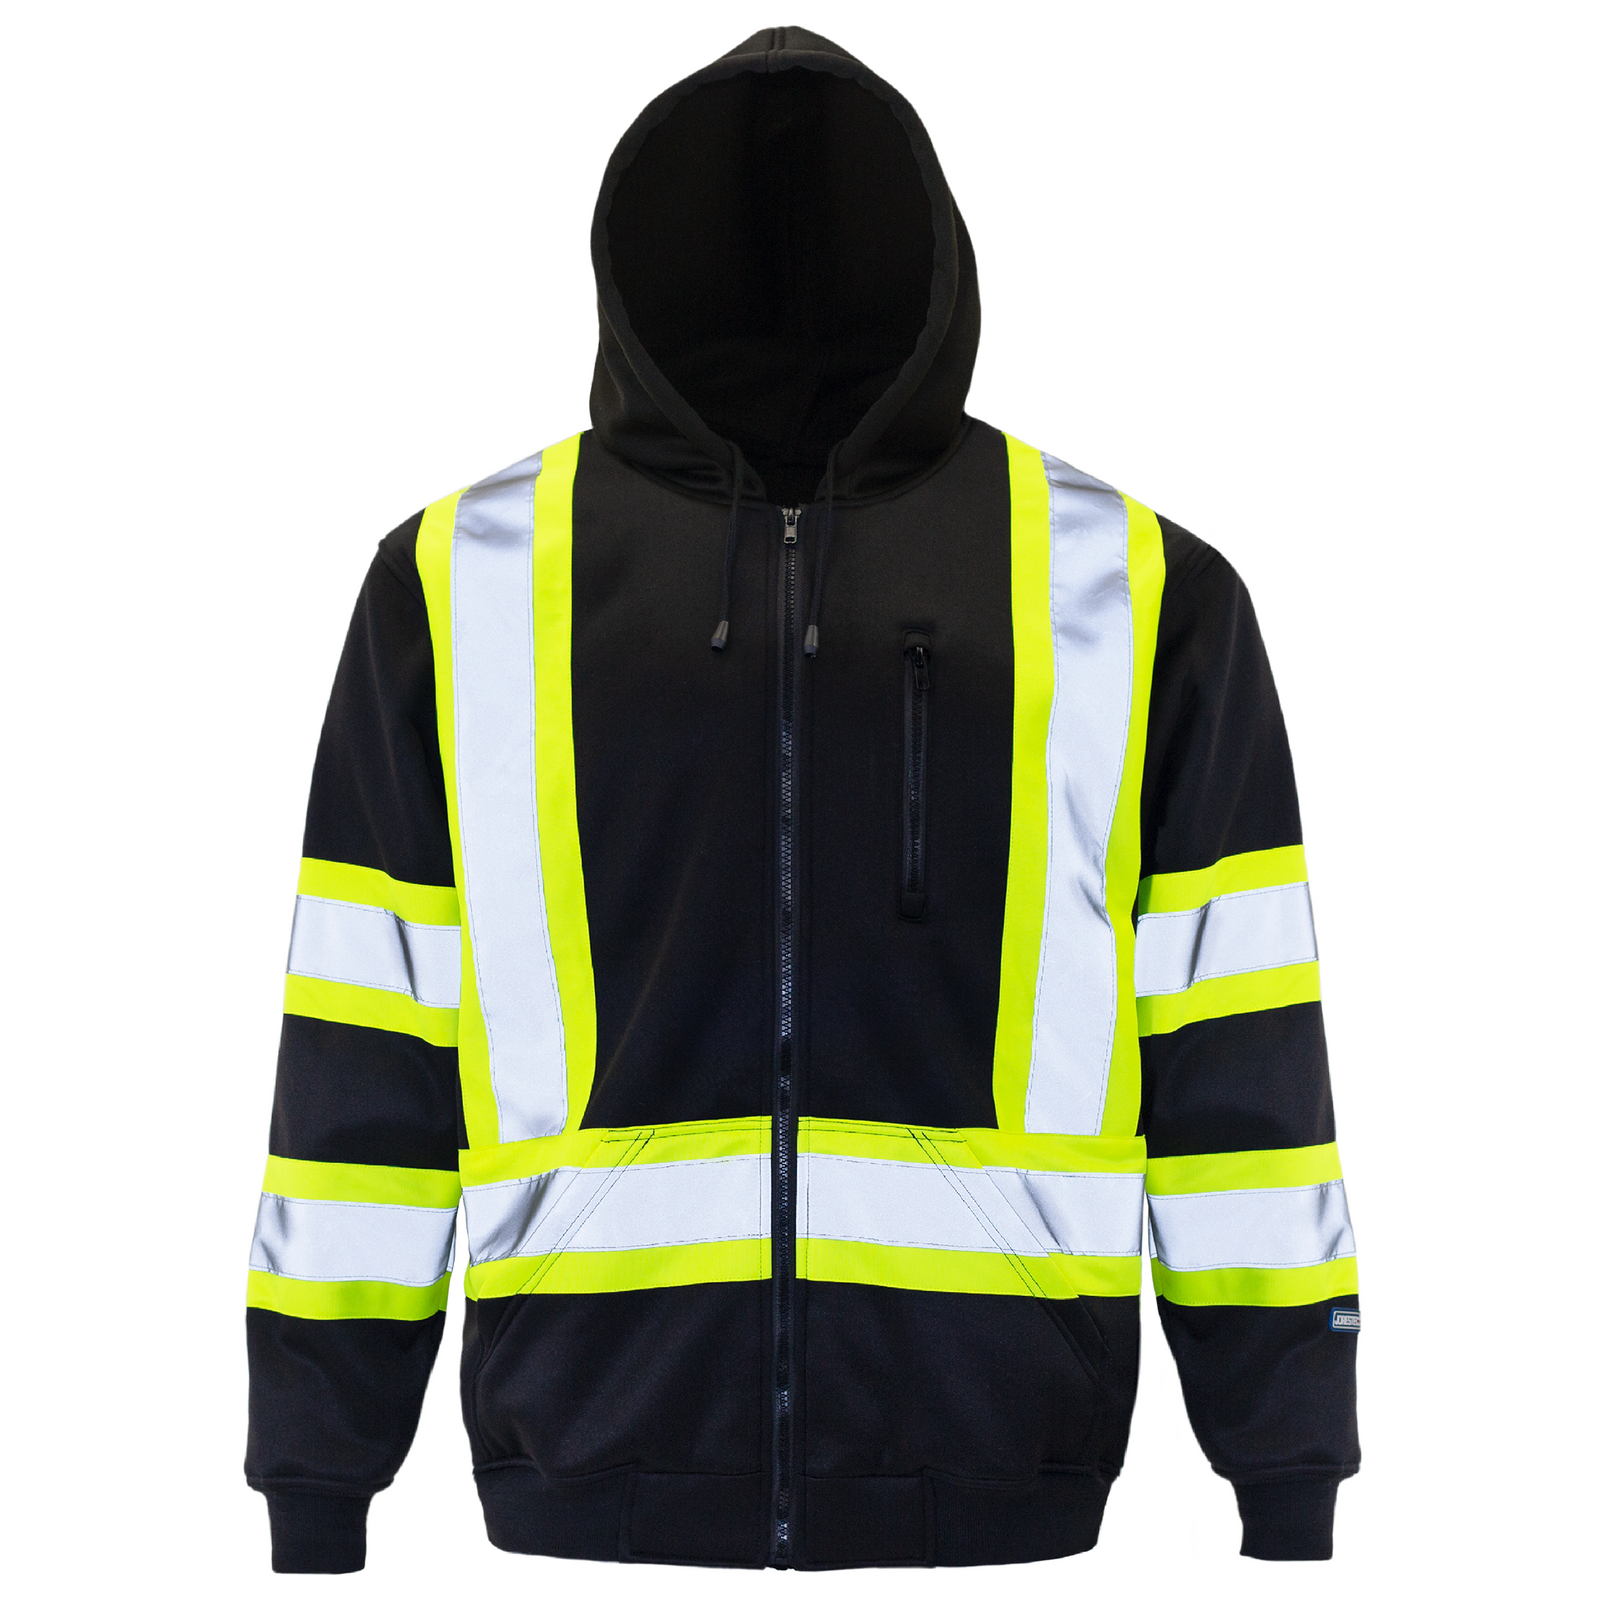 Black safety sweater with contrasting yellow and reflective stripes